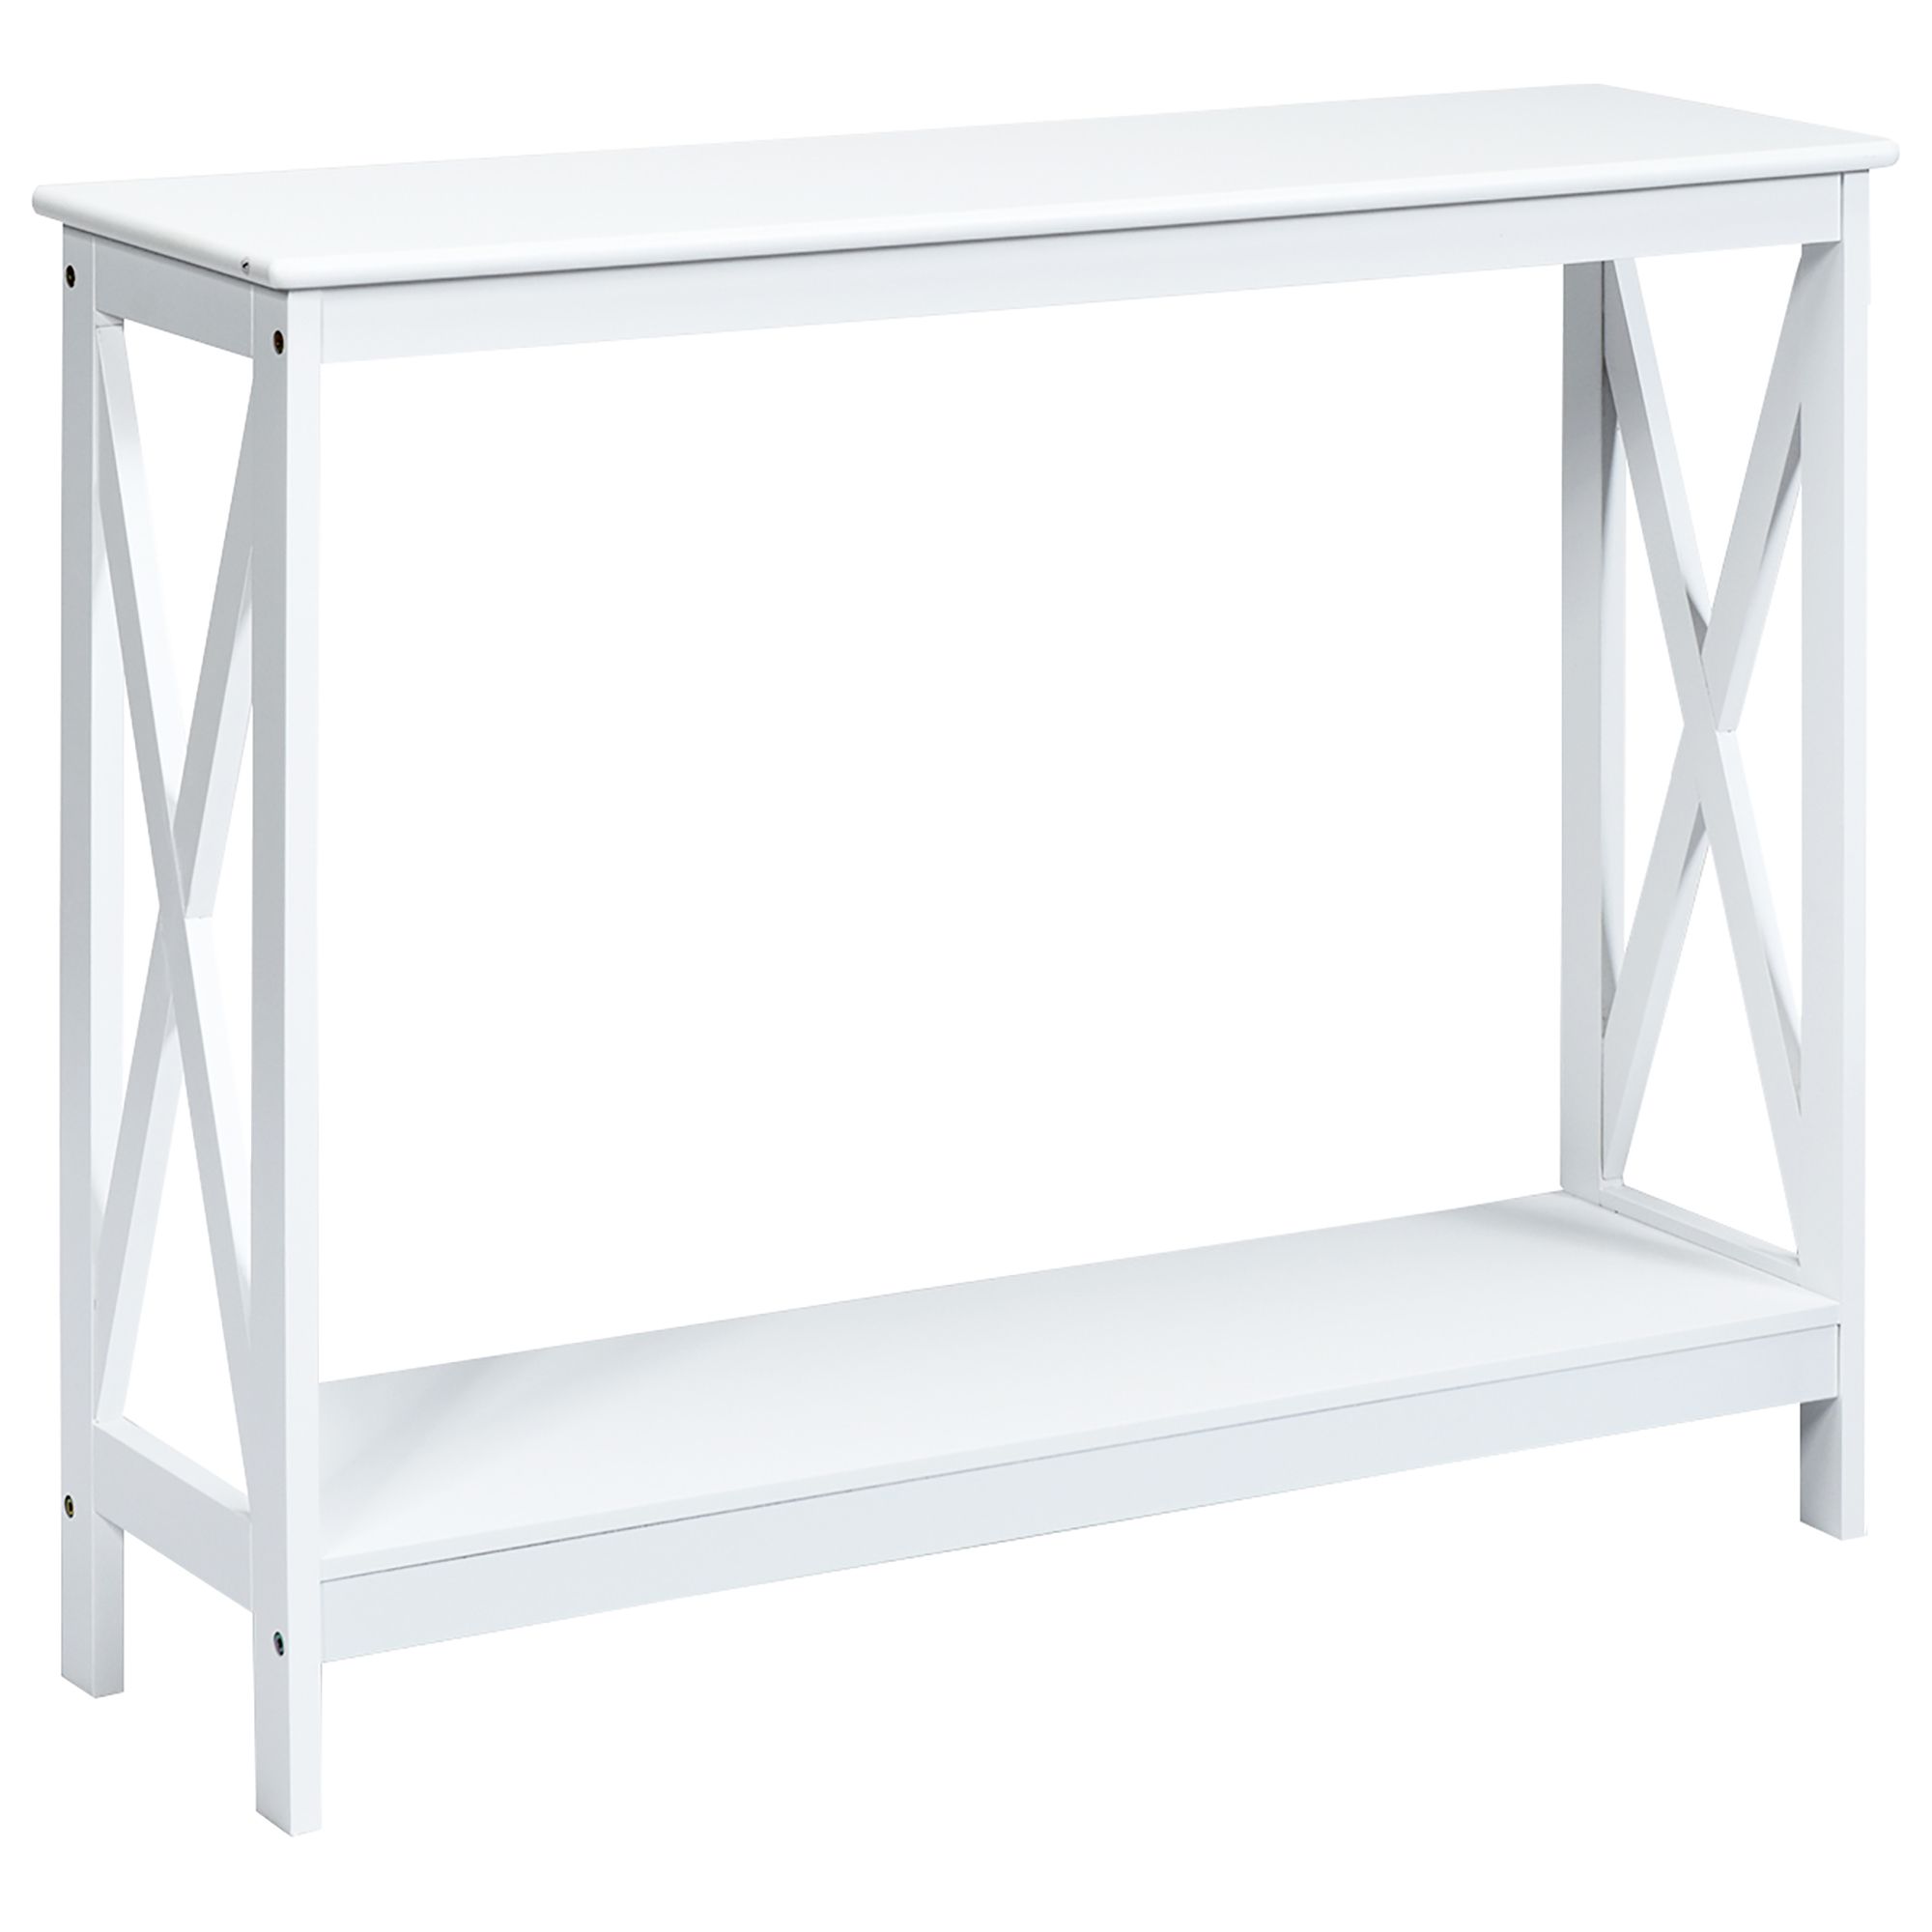 Costway 2 Tier Console Table X Design Bookshelf Sofa Side Accent Table Inside White Grained Wood Hexagonal Console Tables (View 8 of 20)